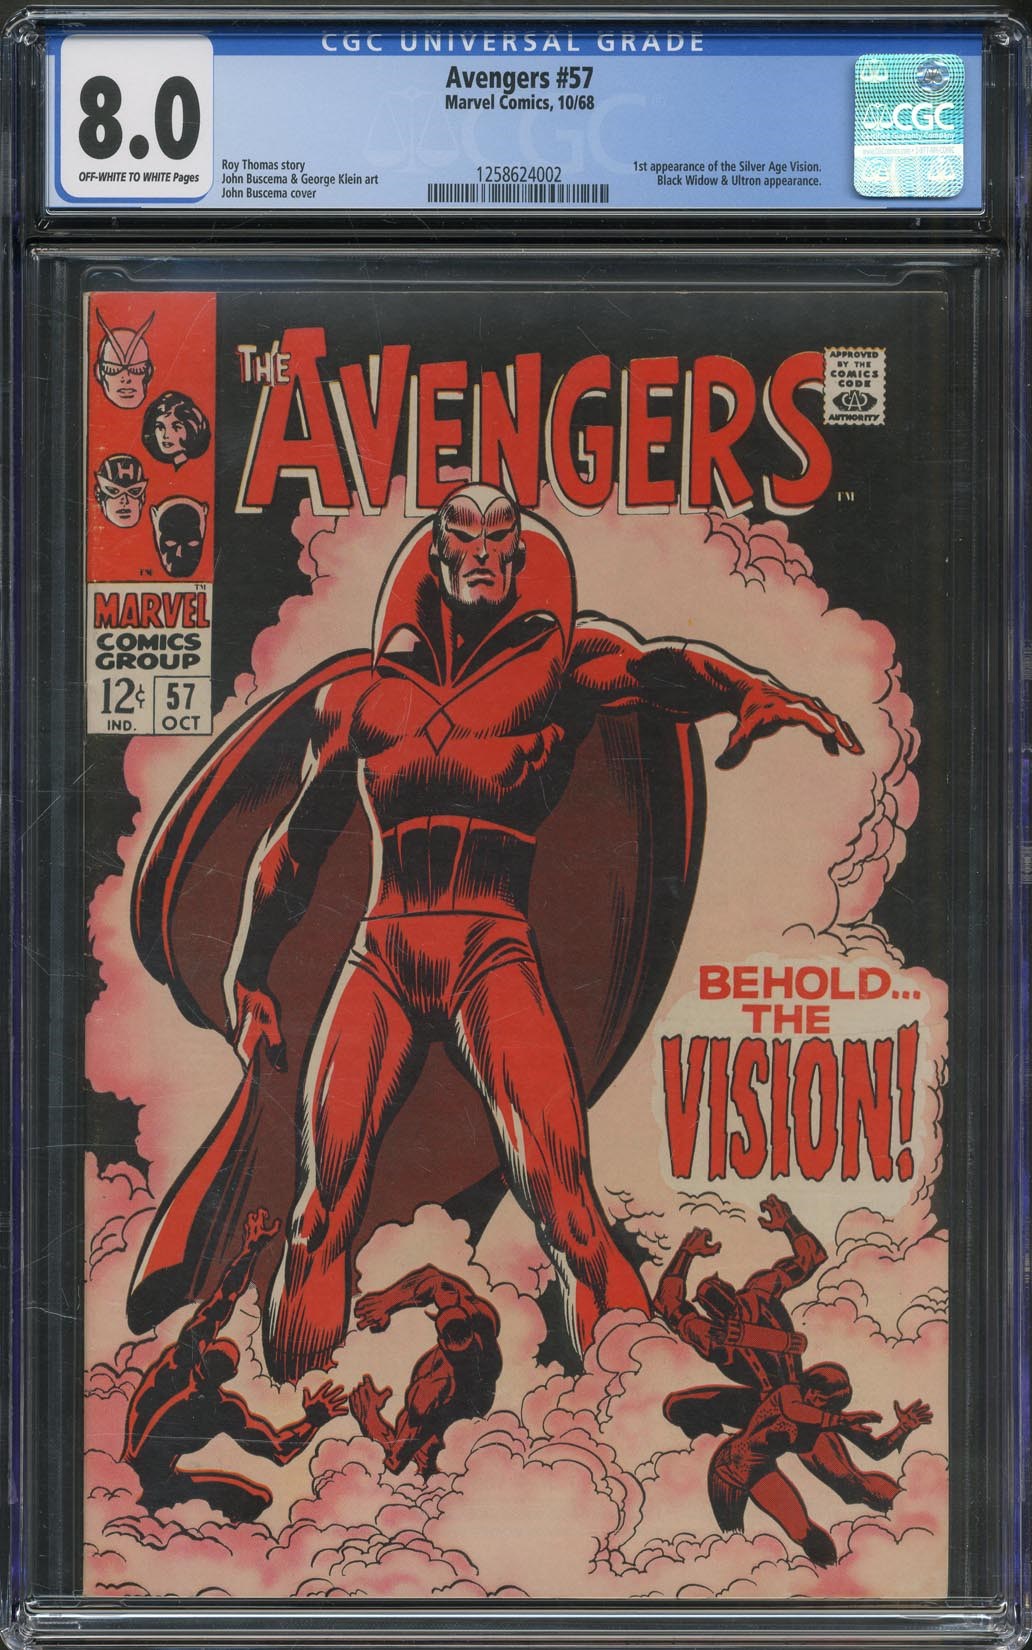 Rock And Pop Culture - The Avengers #57 Featuring the 1st Appearance of Vision (CGC 8.0)